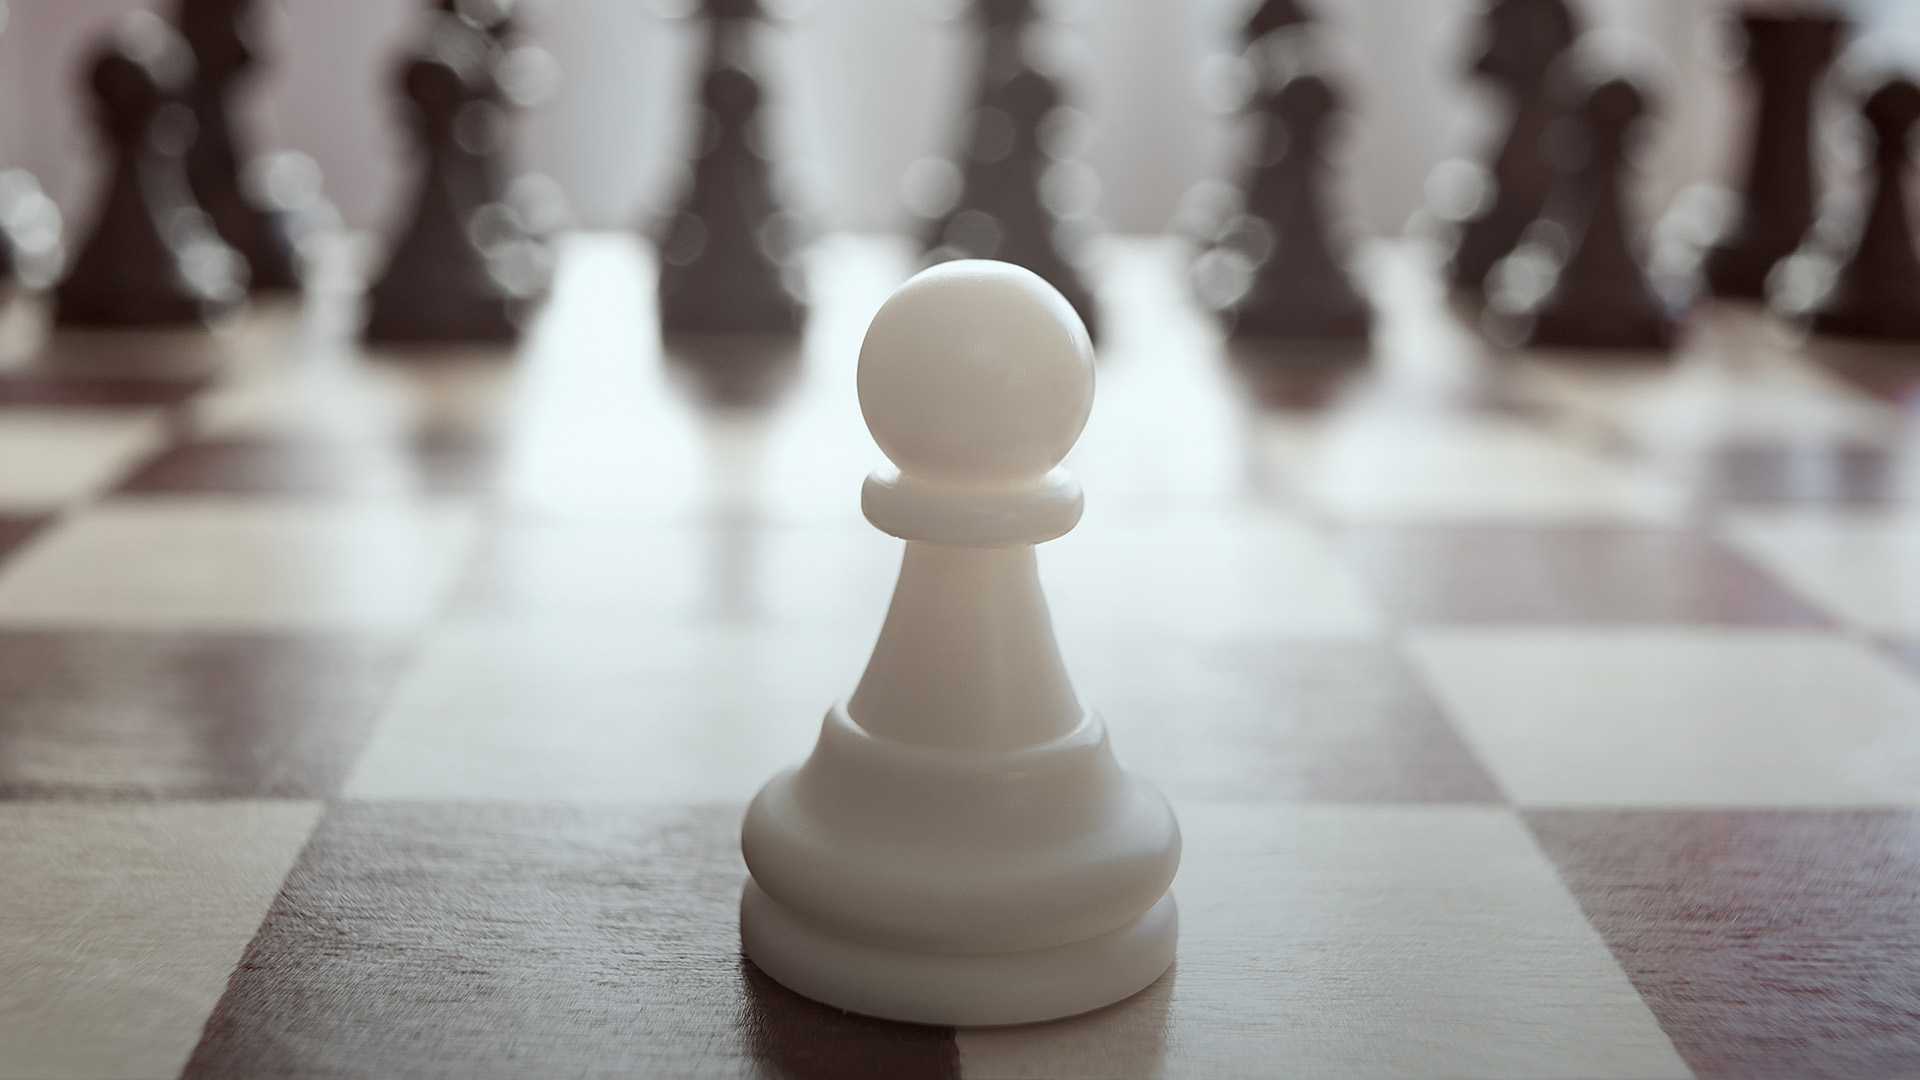 White pawn in chess game